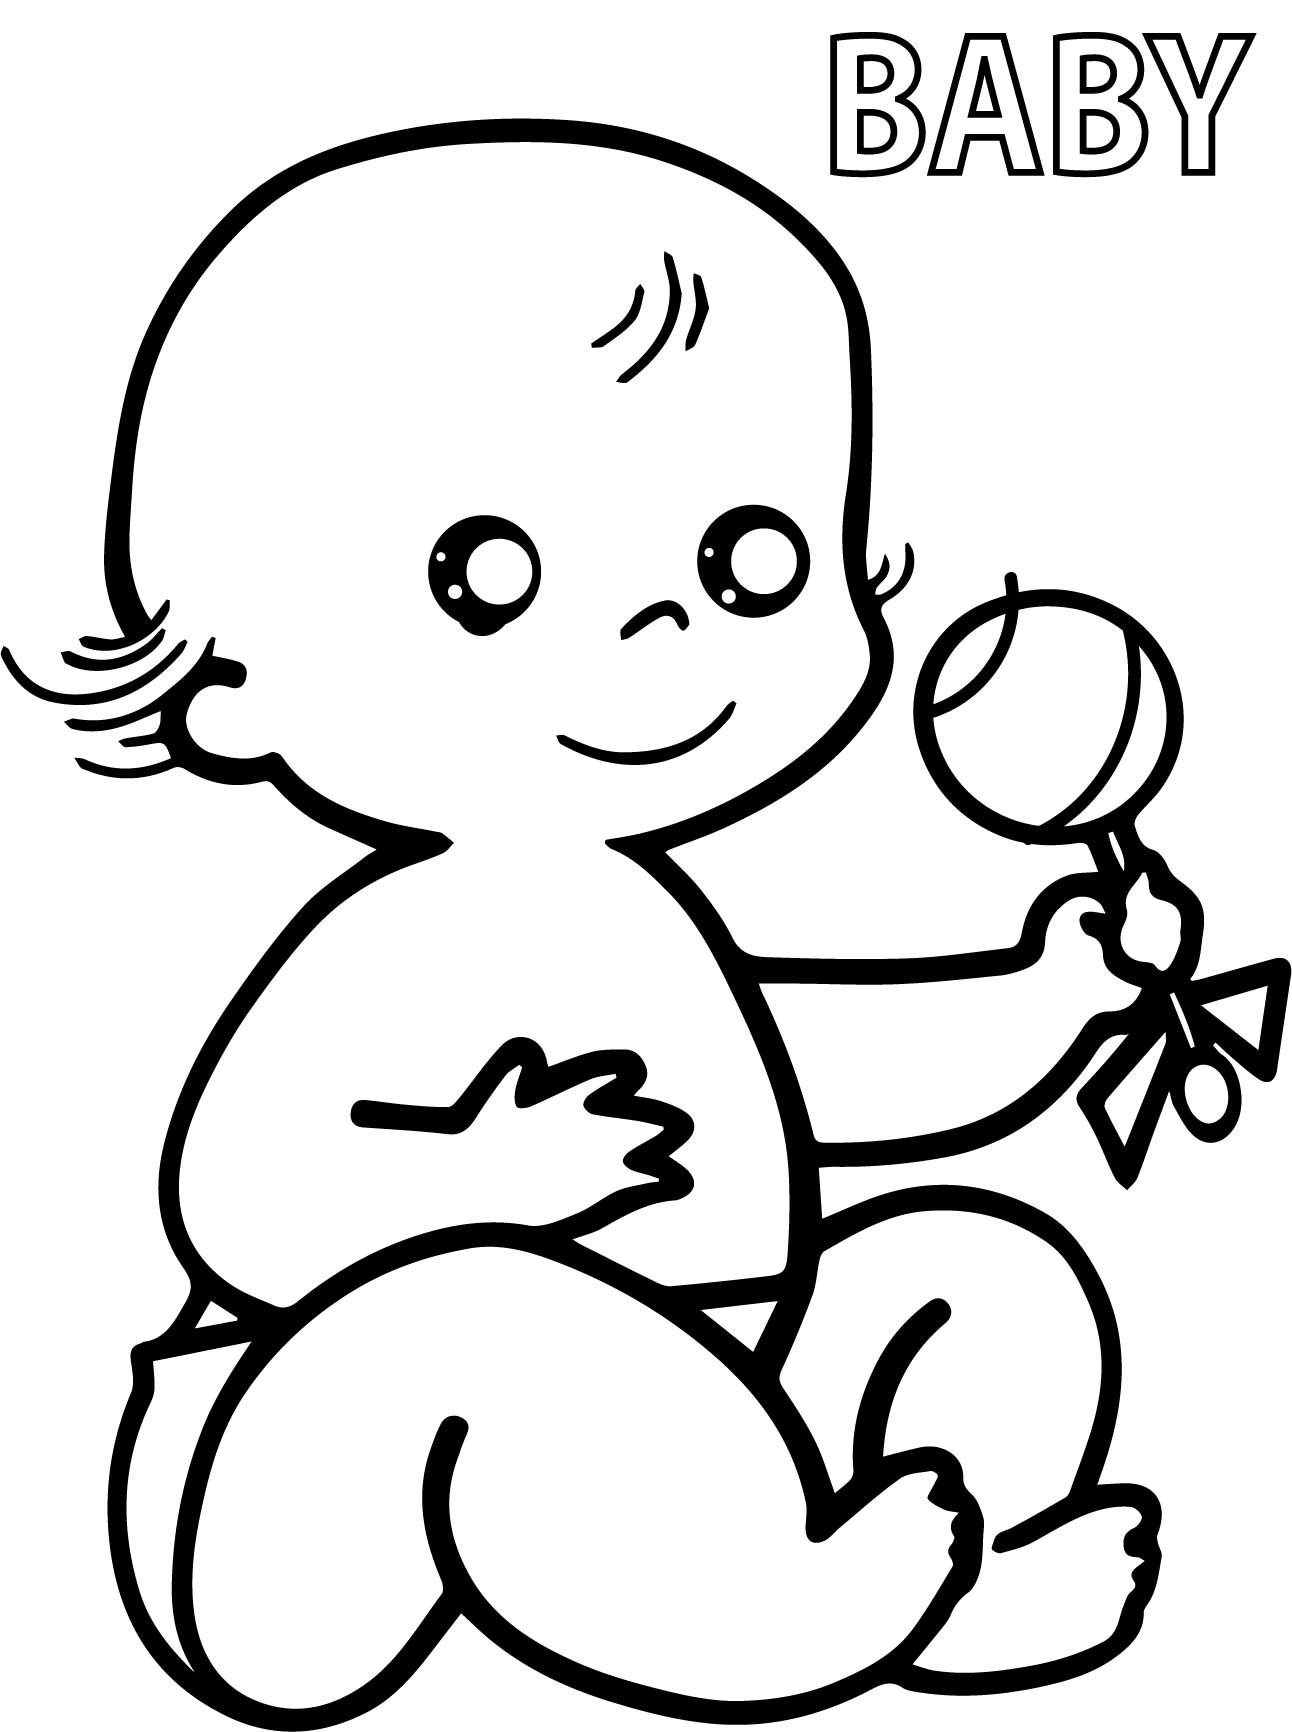 Coloring Book For Baby
 Preschool Baby Coloring Pages